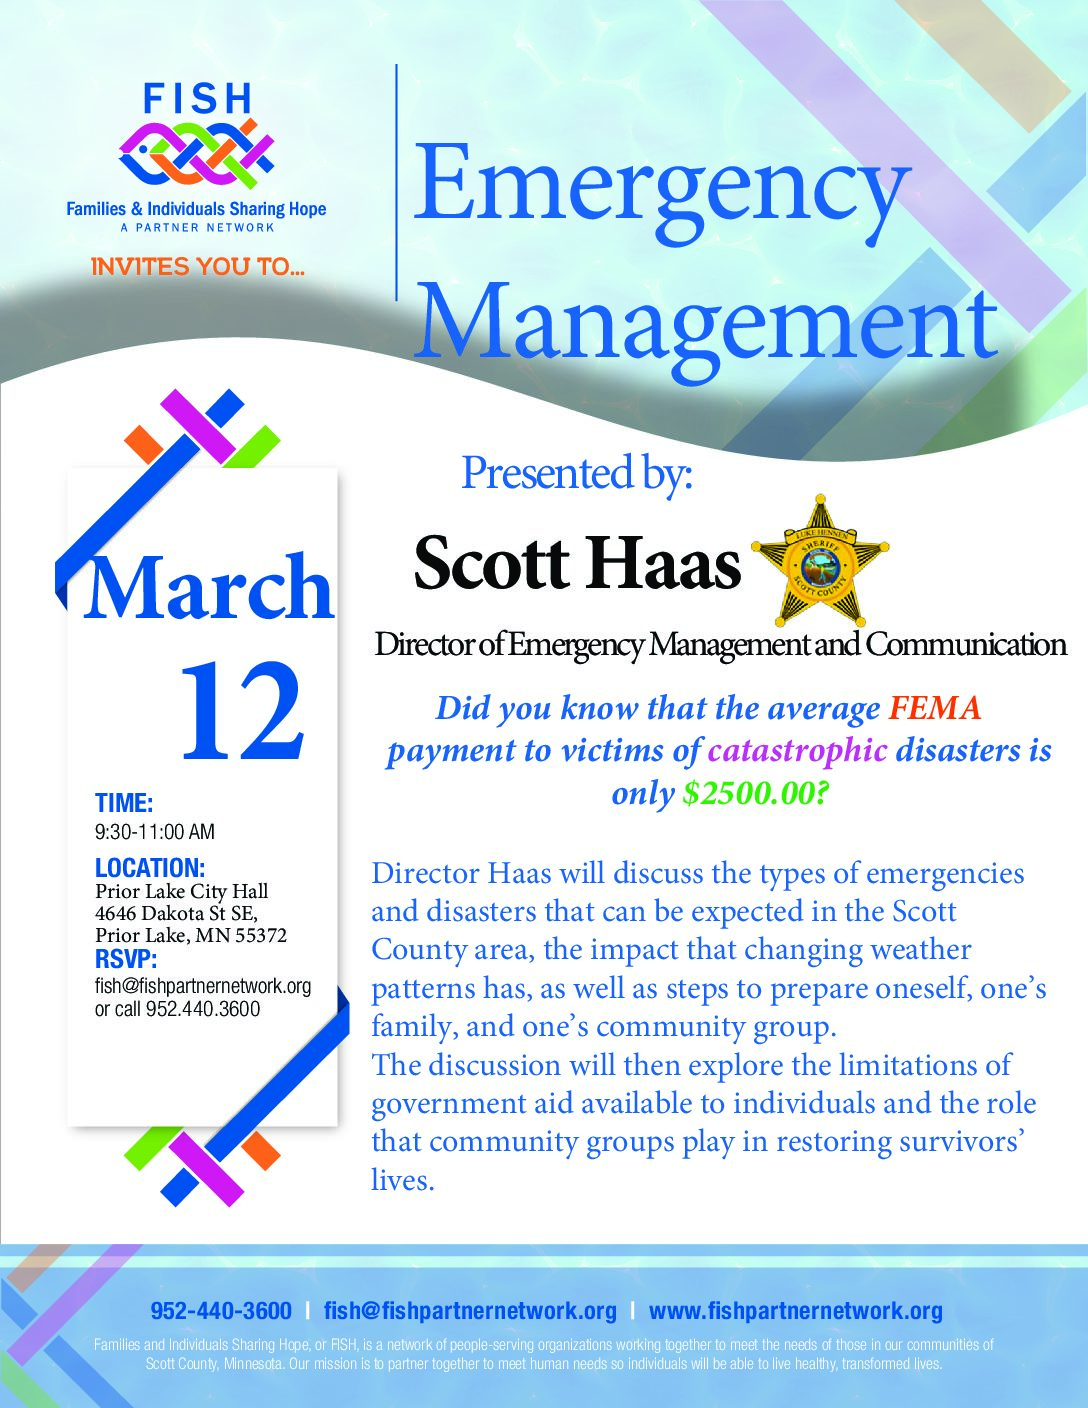 FISH 2nd Thursday Meeting – Emergency Management